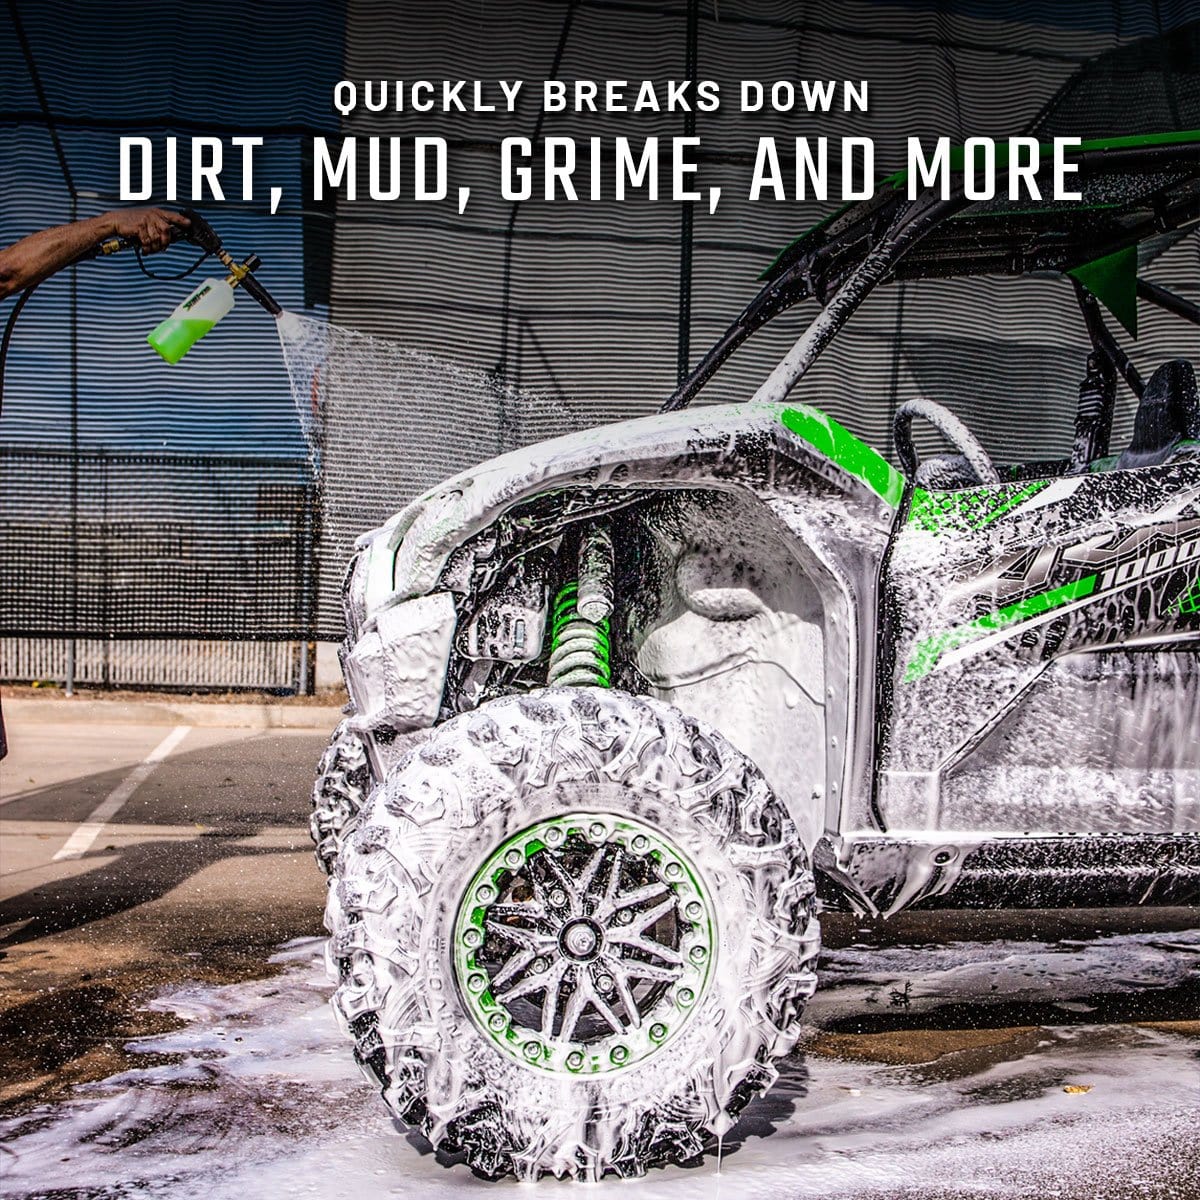 Slick Products Off-Road Wash & Detail Kit